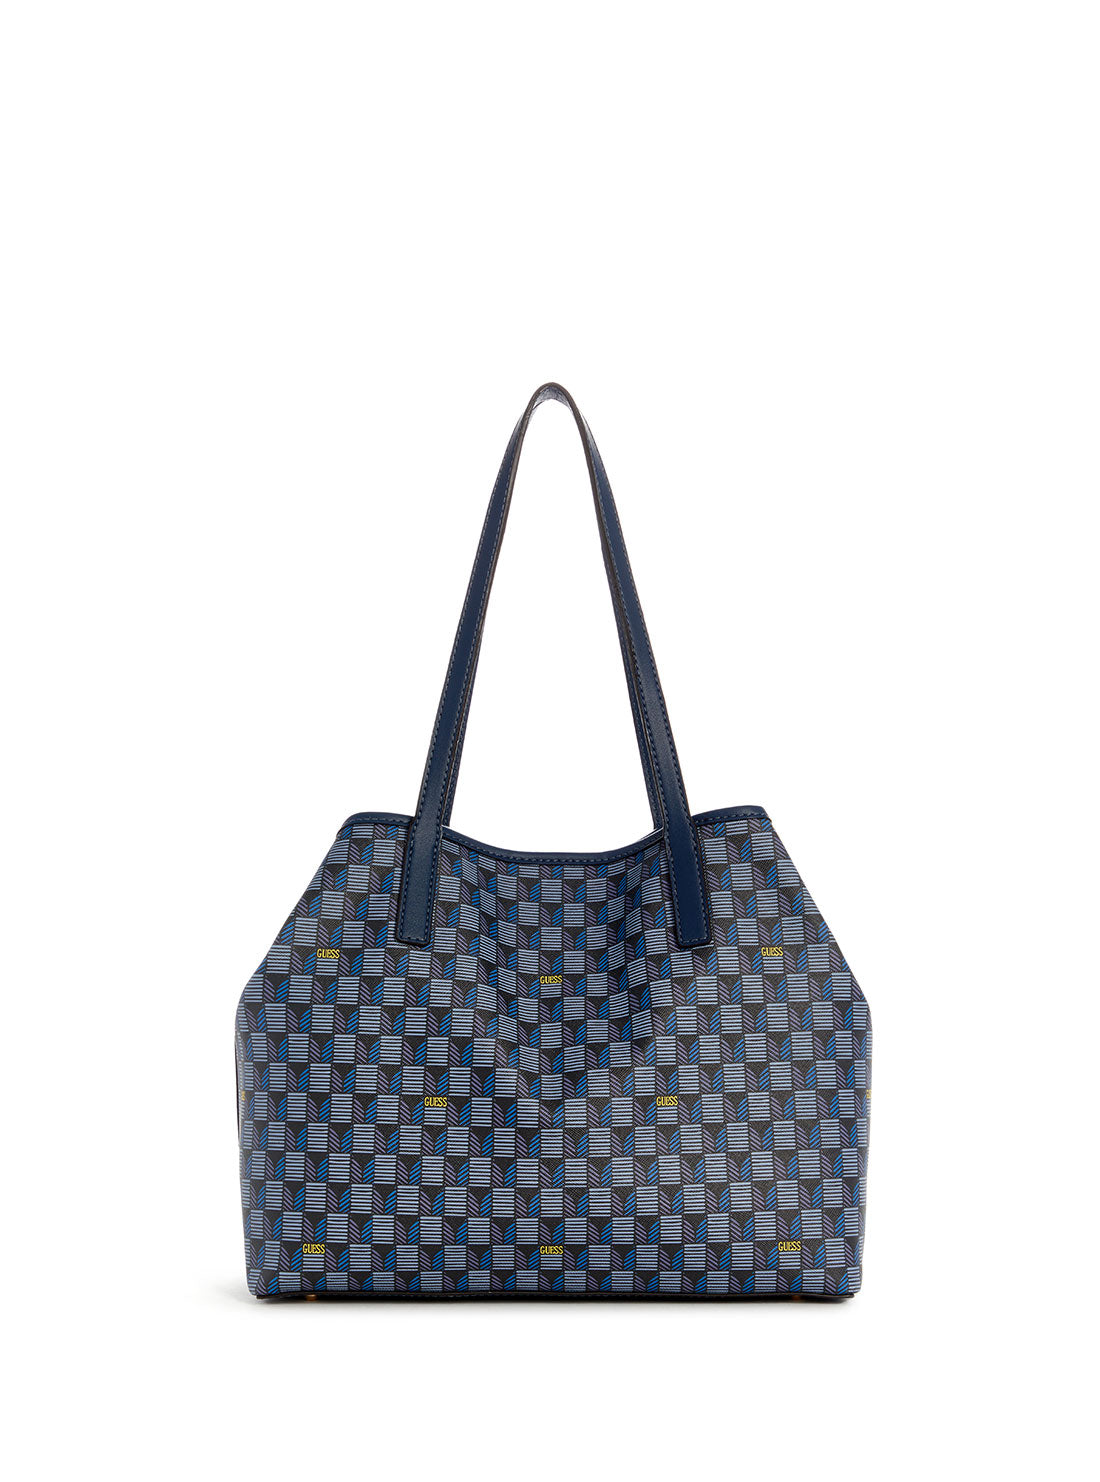 GUESS Blue Logo Vikky 2 in 1 Tote Bag back view